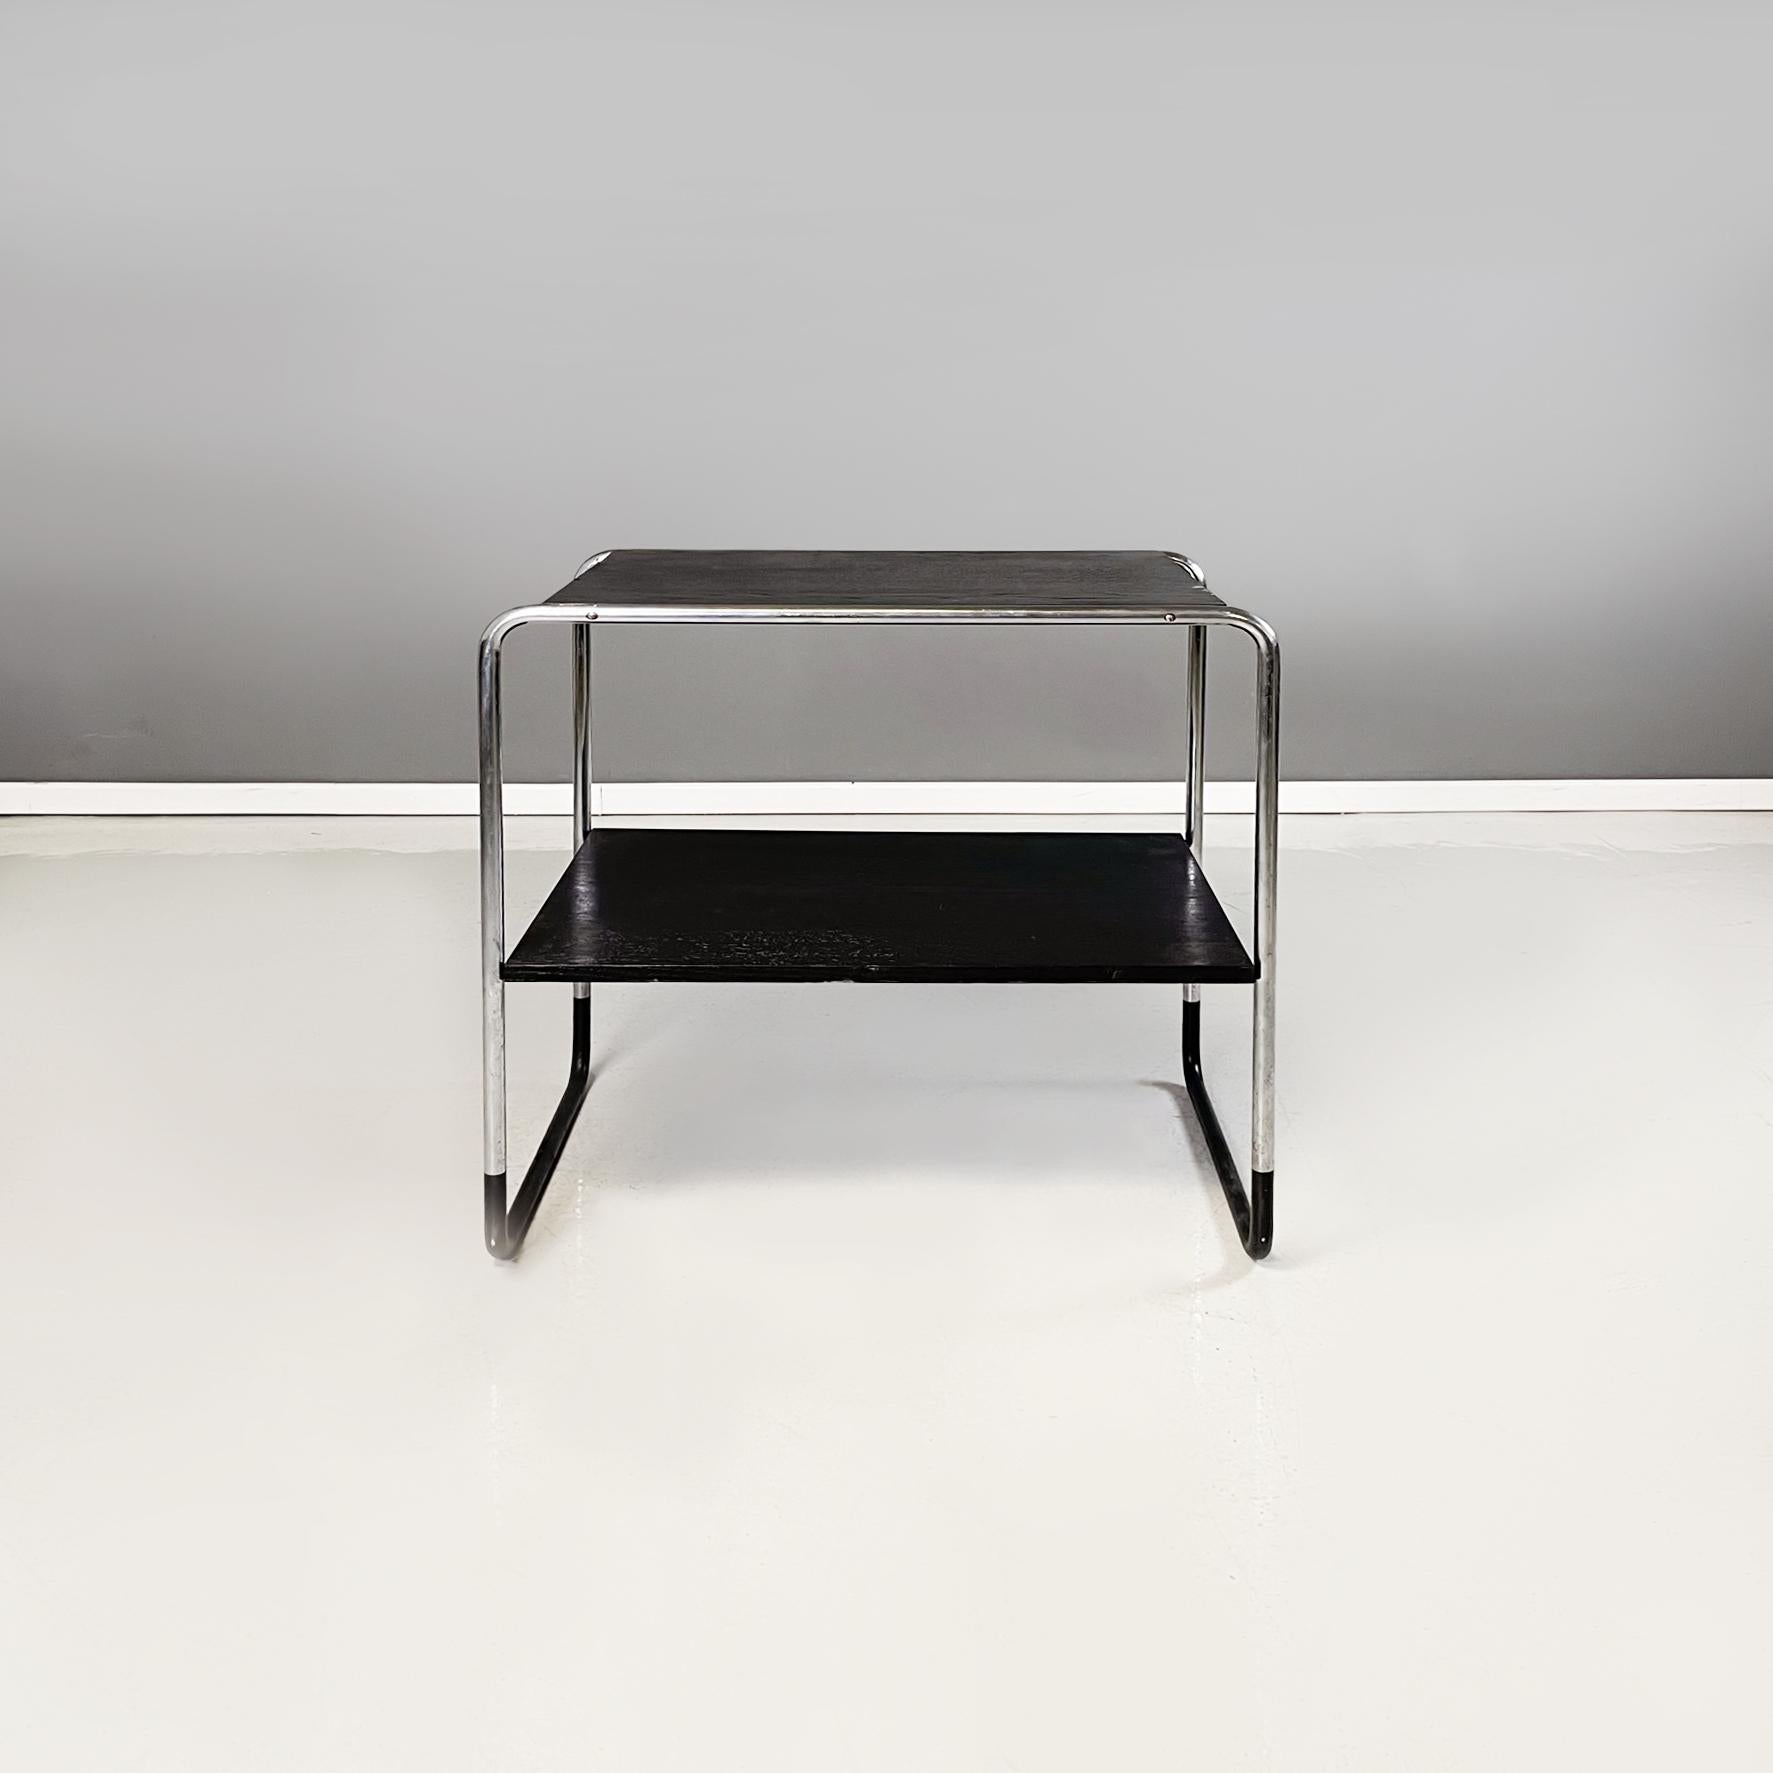 German modern Black wood and steel Coffee table by Arnold Bauhaus Collection, 1980s
Coffee or side table with double rectangular shelf in black painted wood. The structure is in tubular steel, with a black finish at the base. It also can be used as